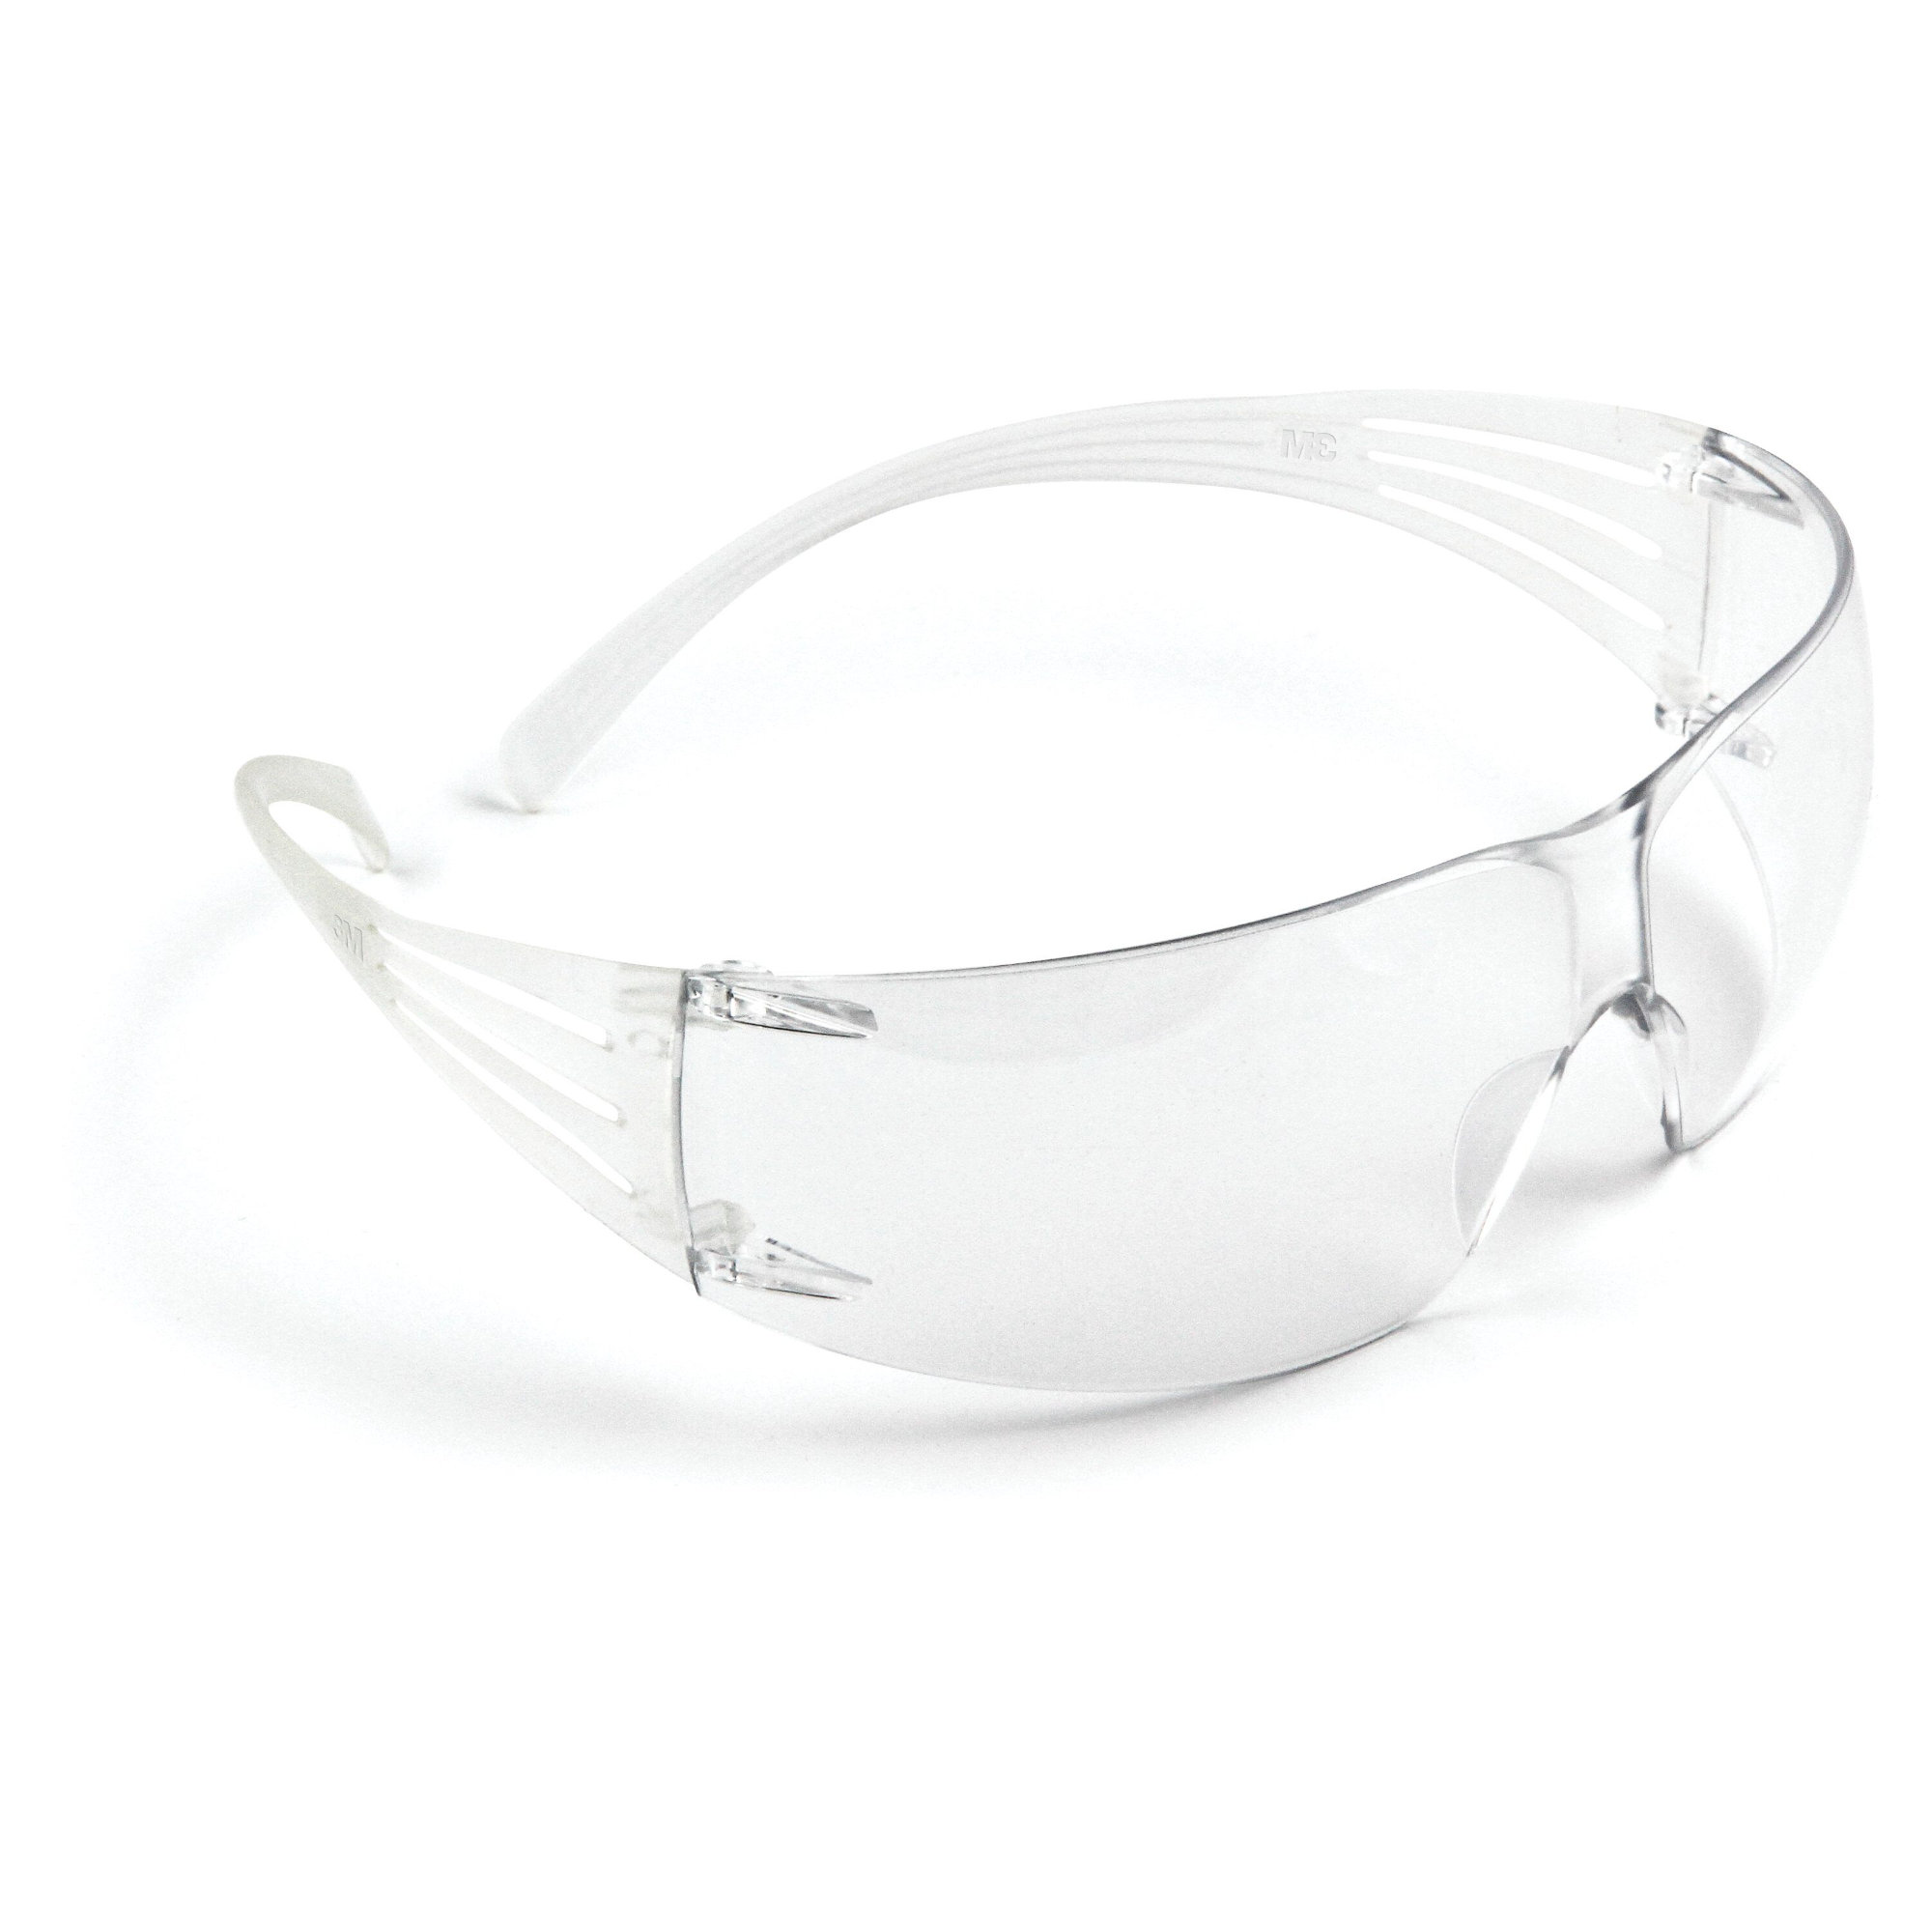 3m™ Securefit™ 200 Series Safety Glasses Sherwin Williams